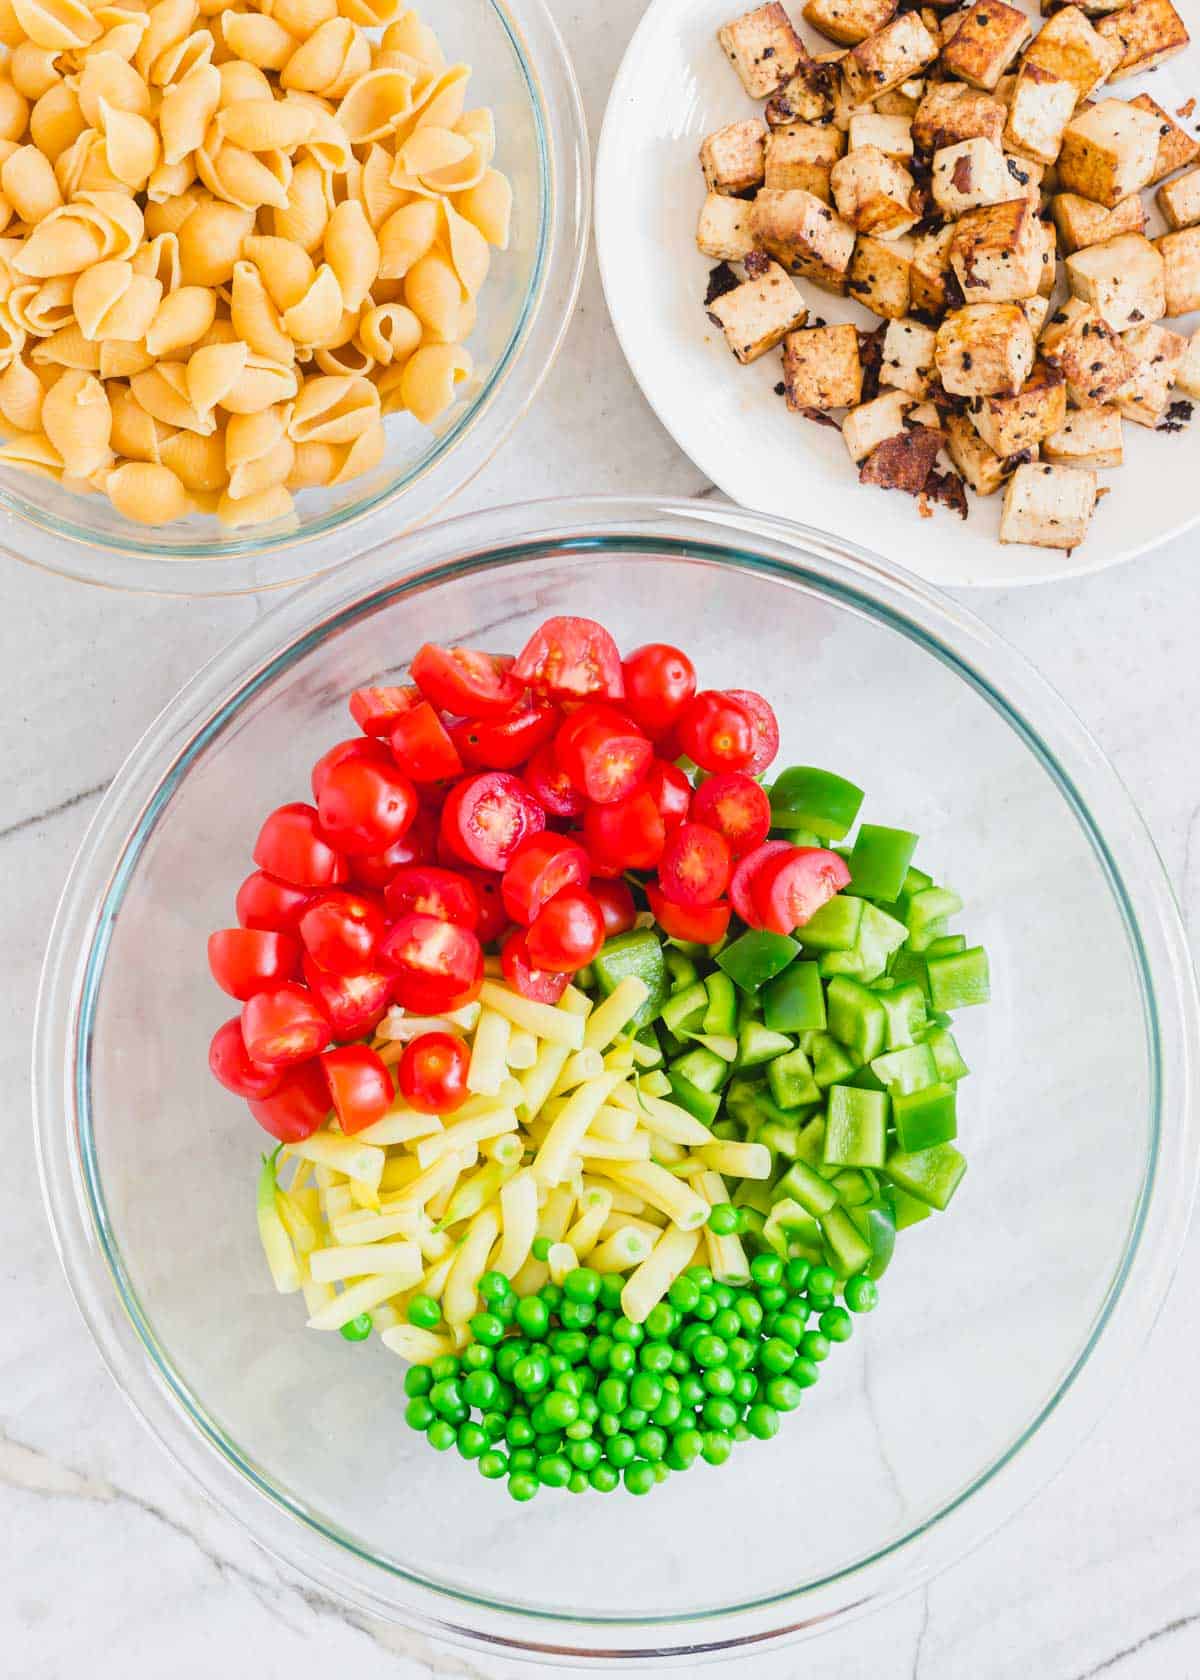 Ingredients to make a tofu pasta salad recipe including cherry tomatoes, green peppers, peas and yellow wax beans in a glass bowl with cooked tofu on a plate and cooked shell pasta in another bowl.